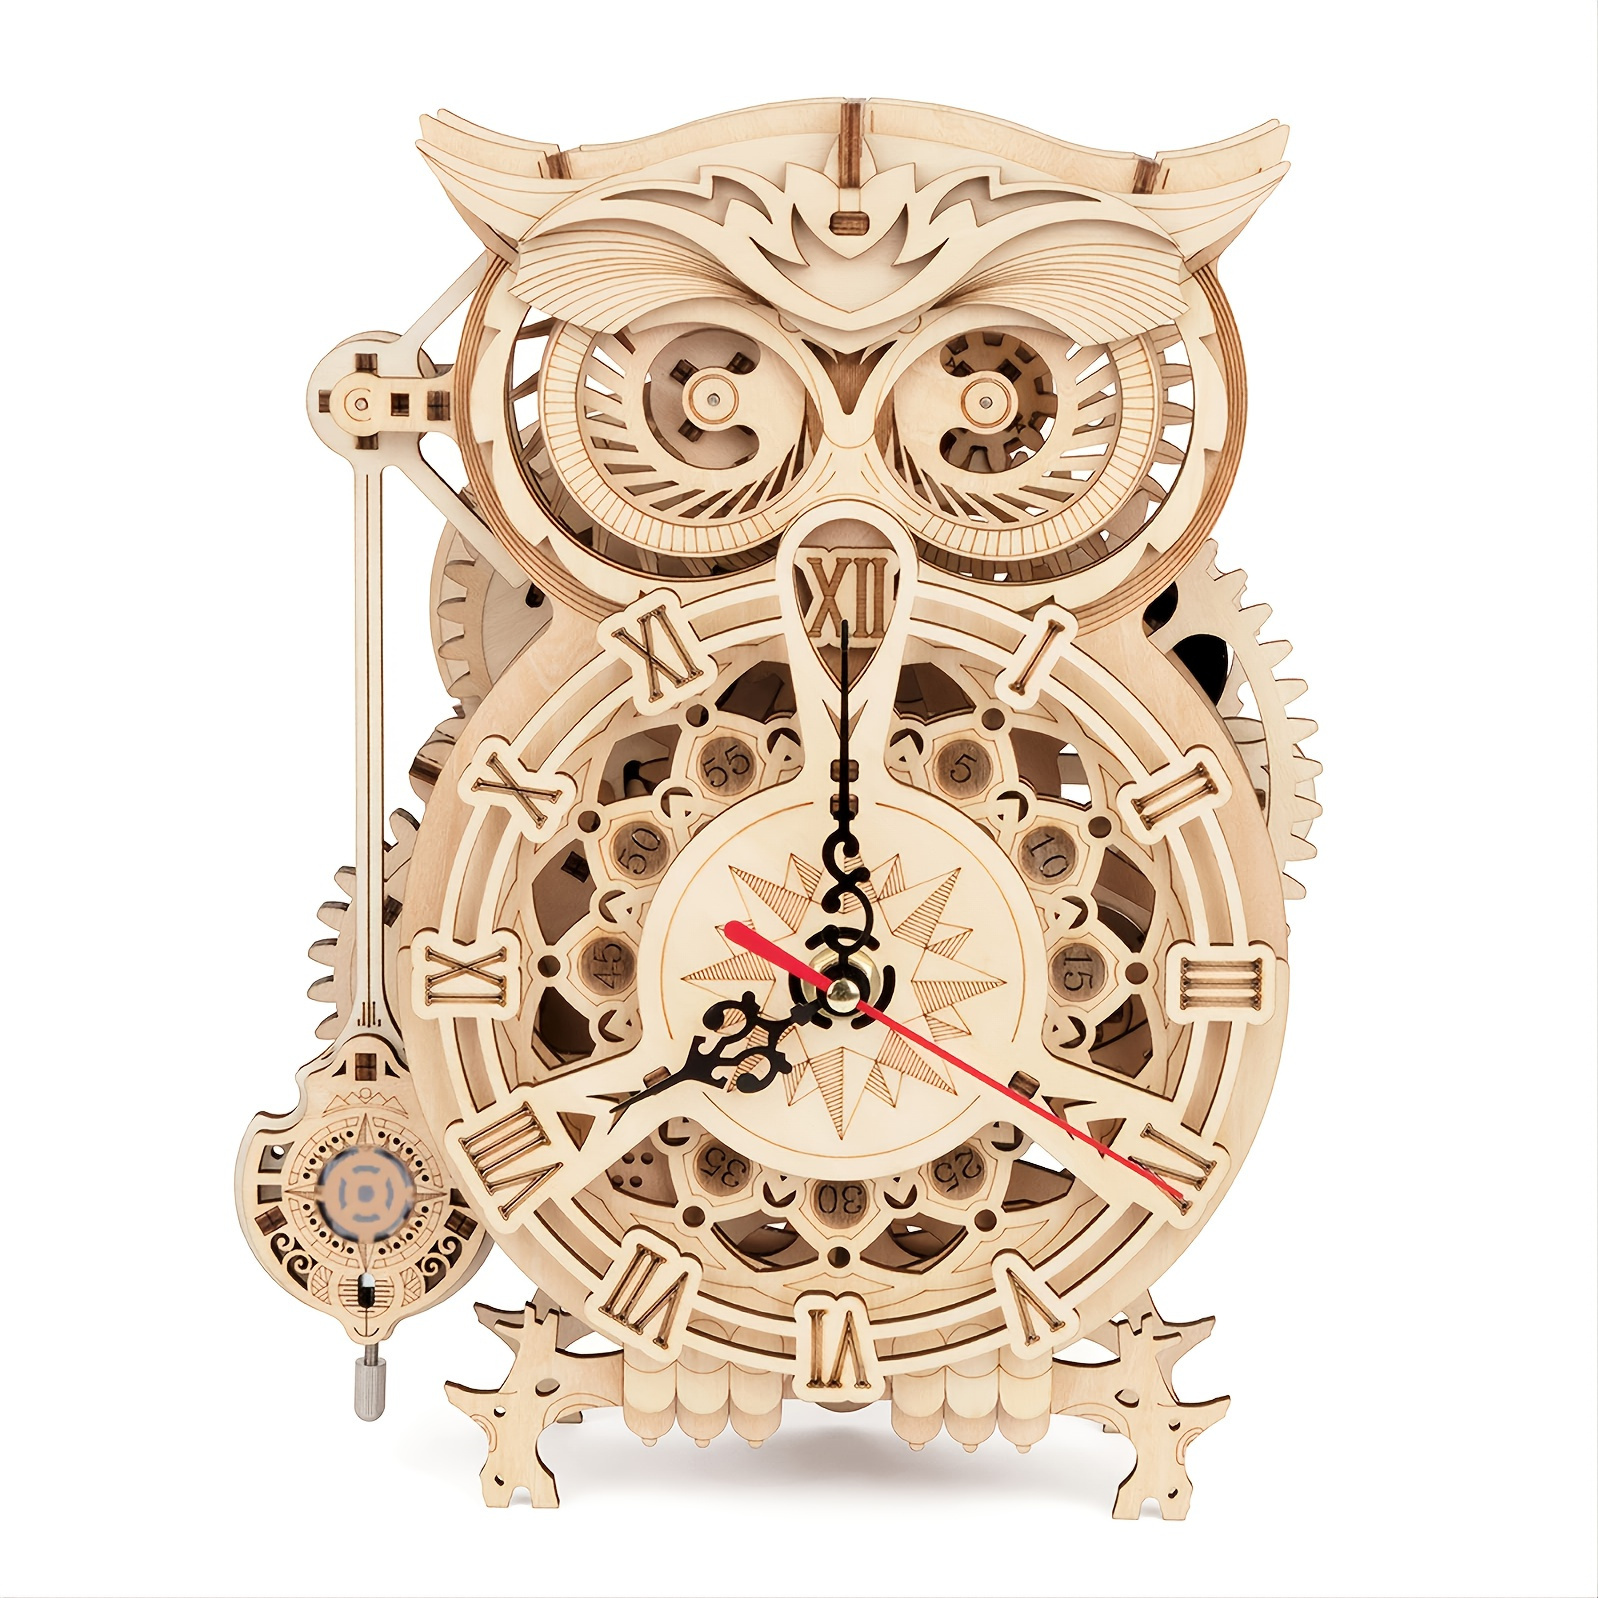 

3d Wooden Puzzle Owl Clock Model Kit Desk Clock Home Decor Unique Gift On Birthday/christmas Day